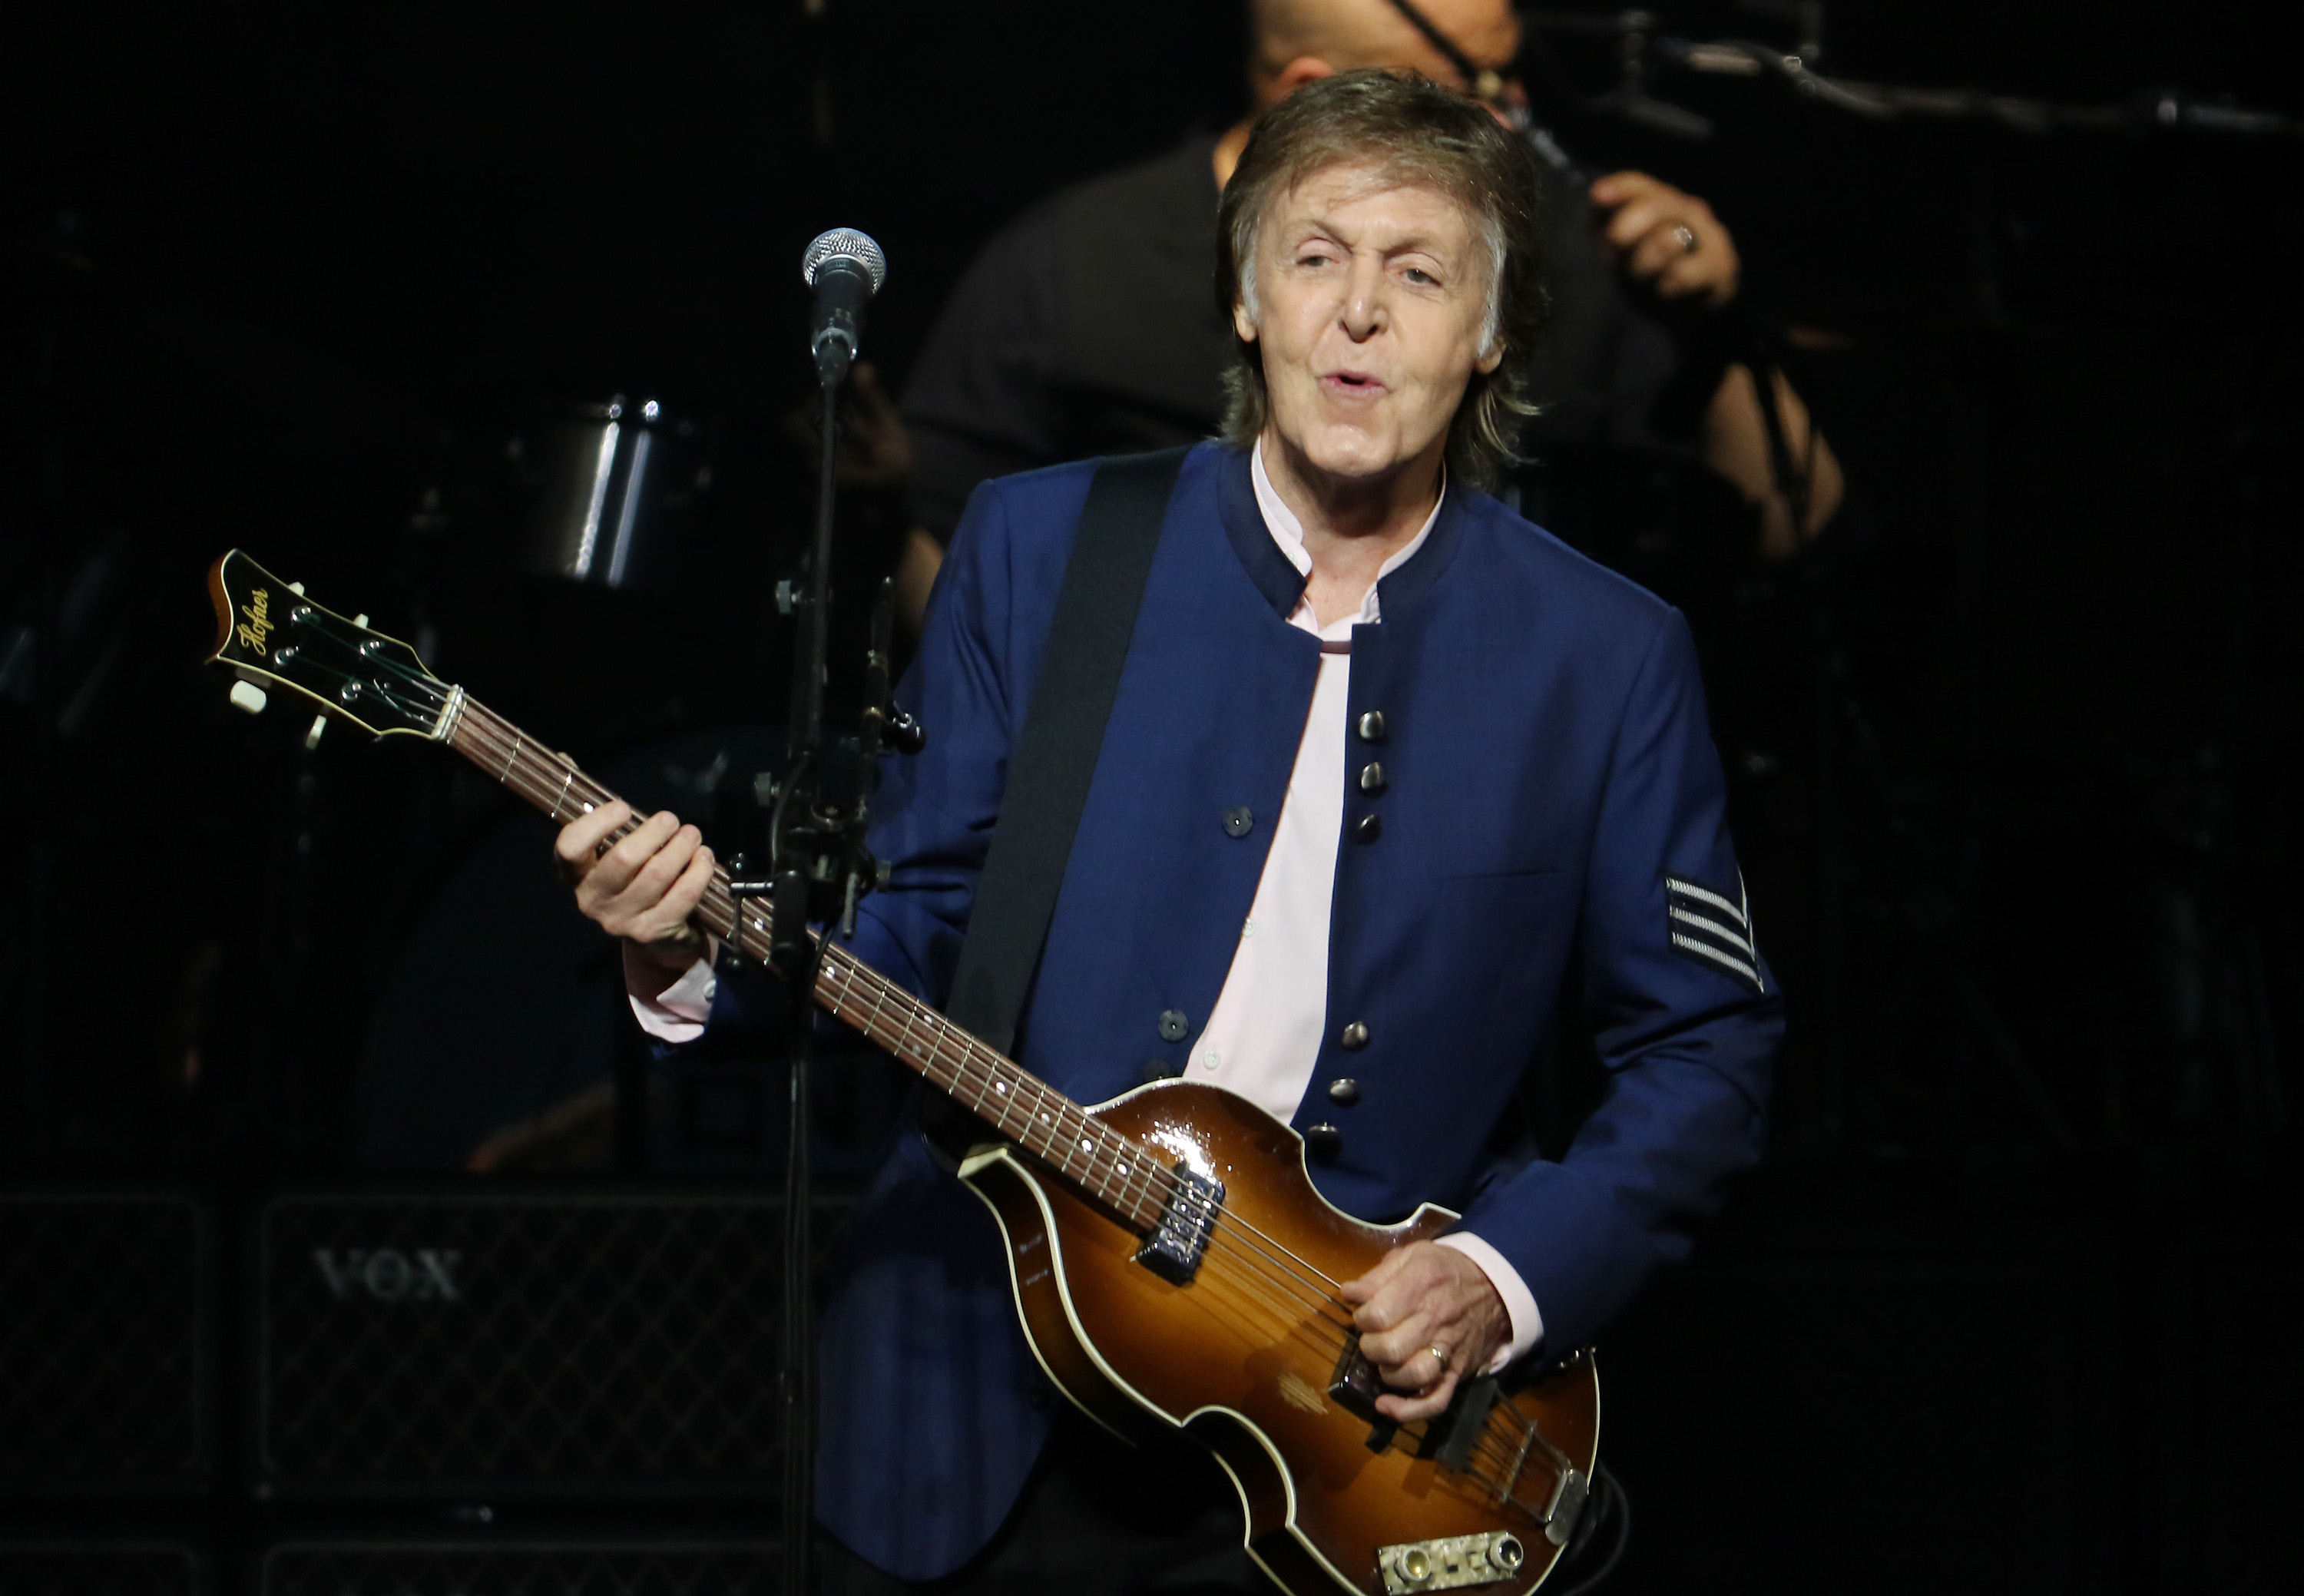 Paul McCartney performs at the American Airlines Arena in Miami, Florida